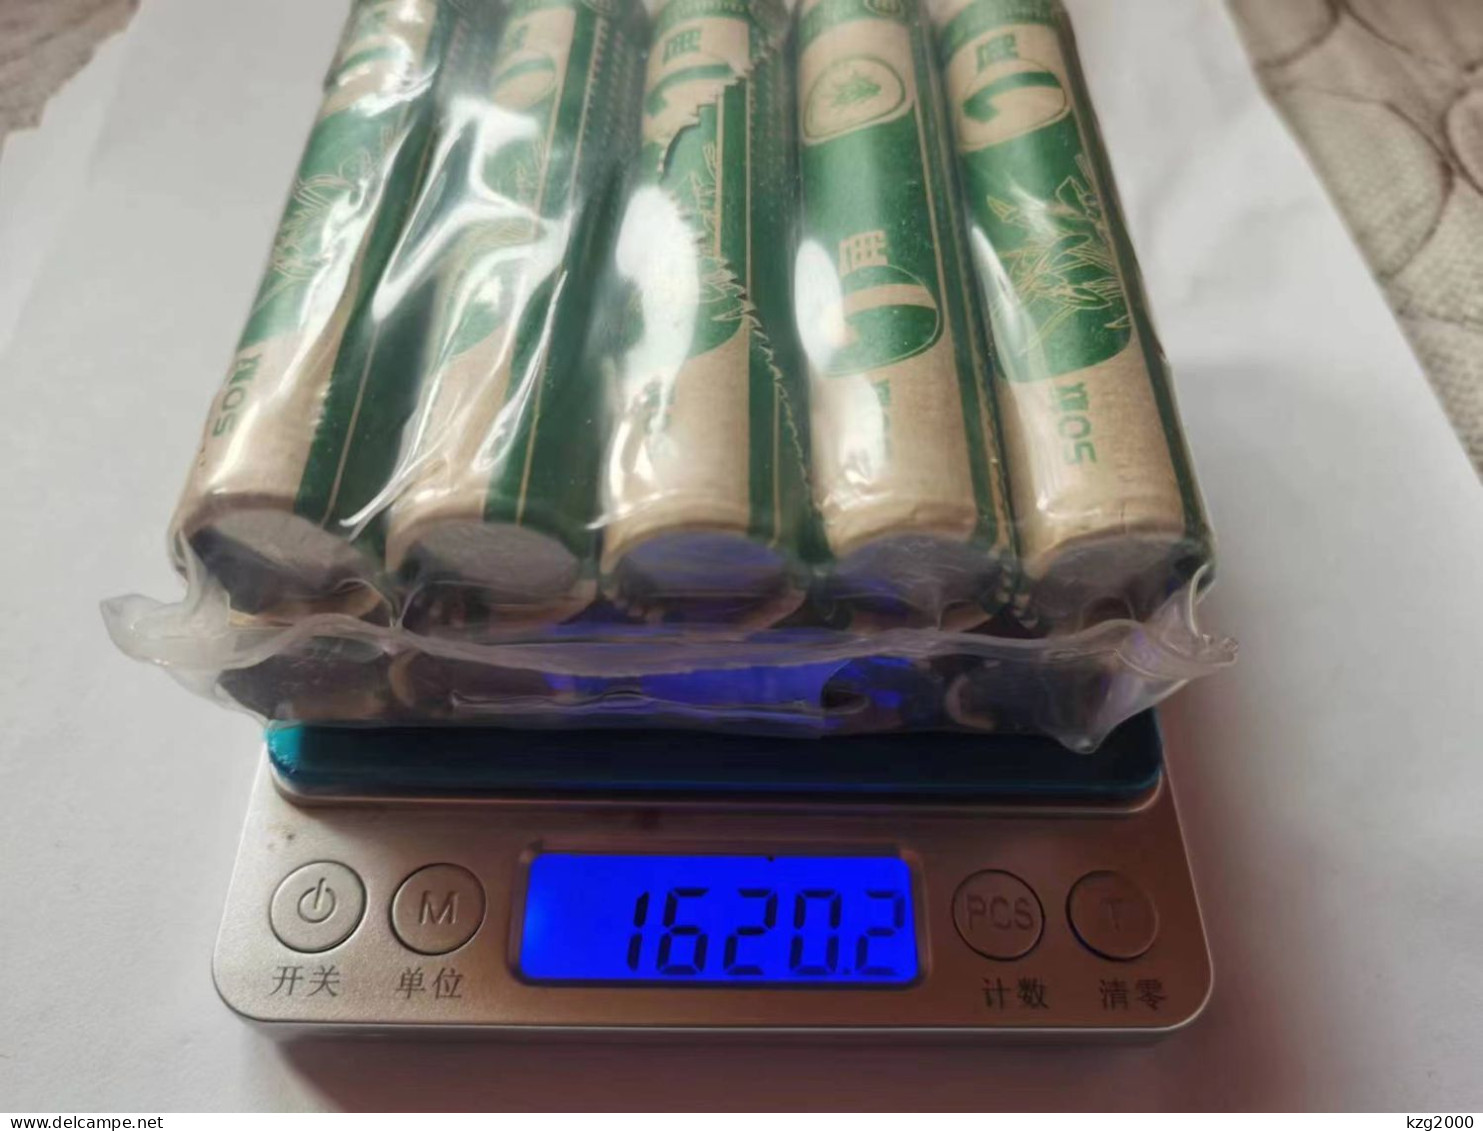 China Coin 2021  RMB 10 Fen  10 Cent  Steel Core Nickel Plating  10 Rolls X 50sets  = 500 Sets  500 Coins  500Pcs  1.6KG - Cina